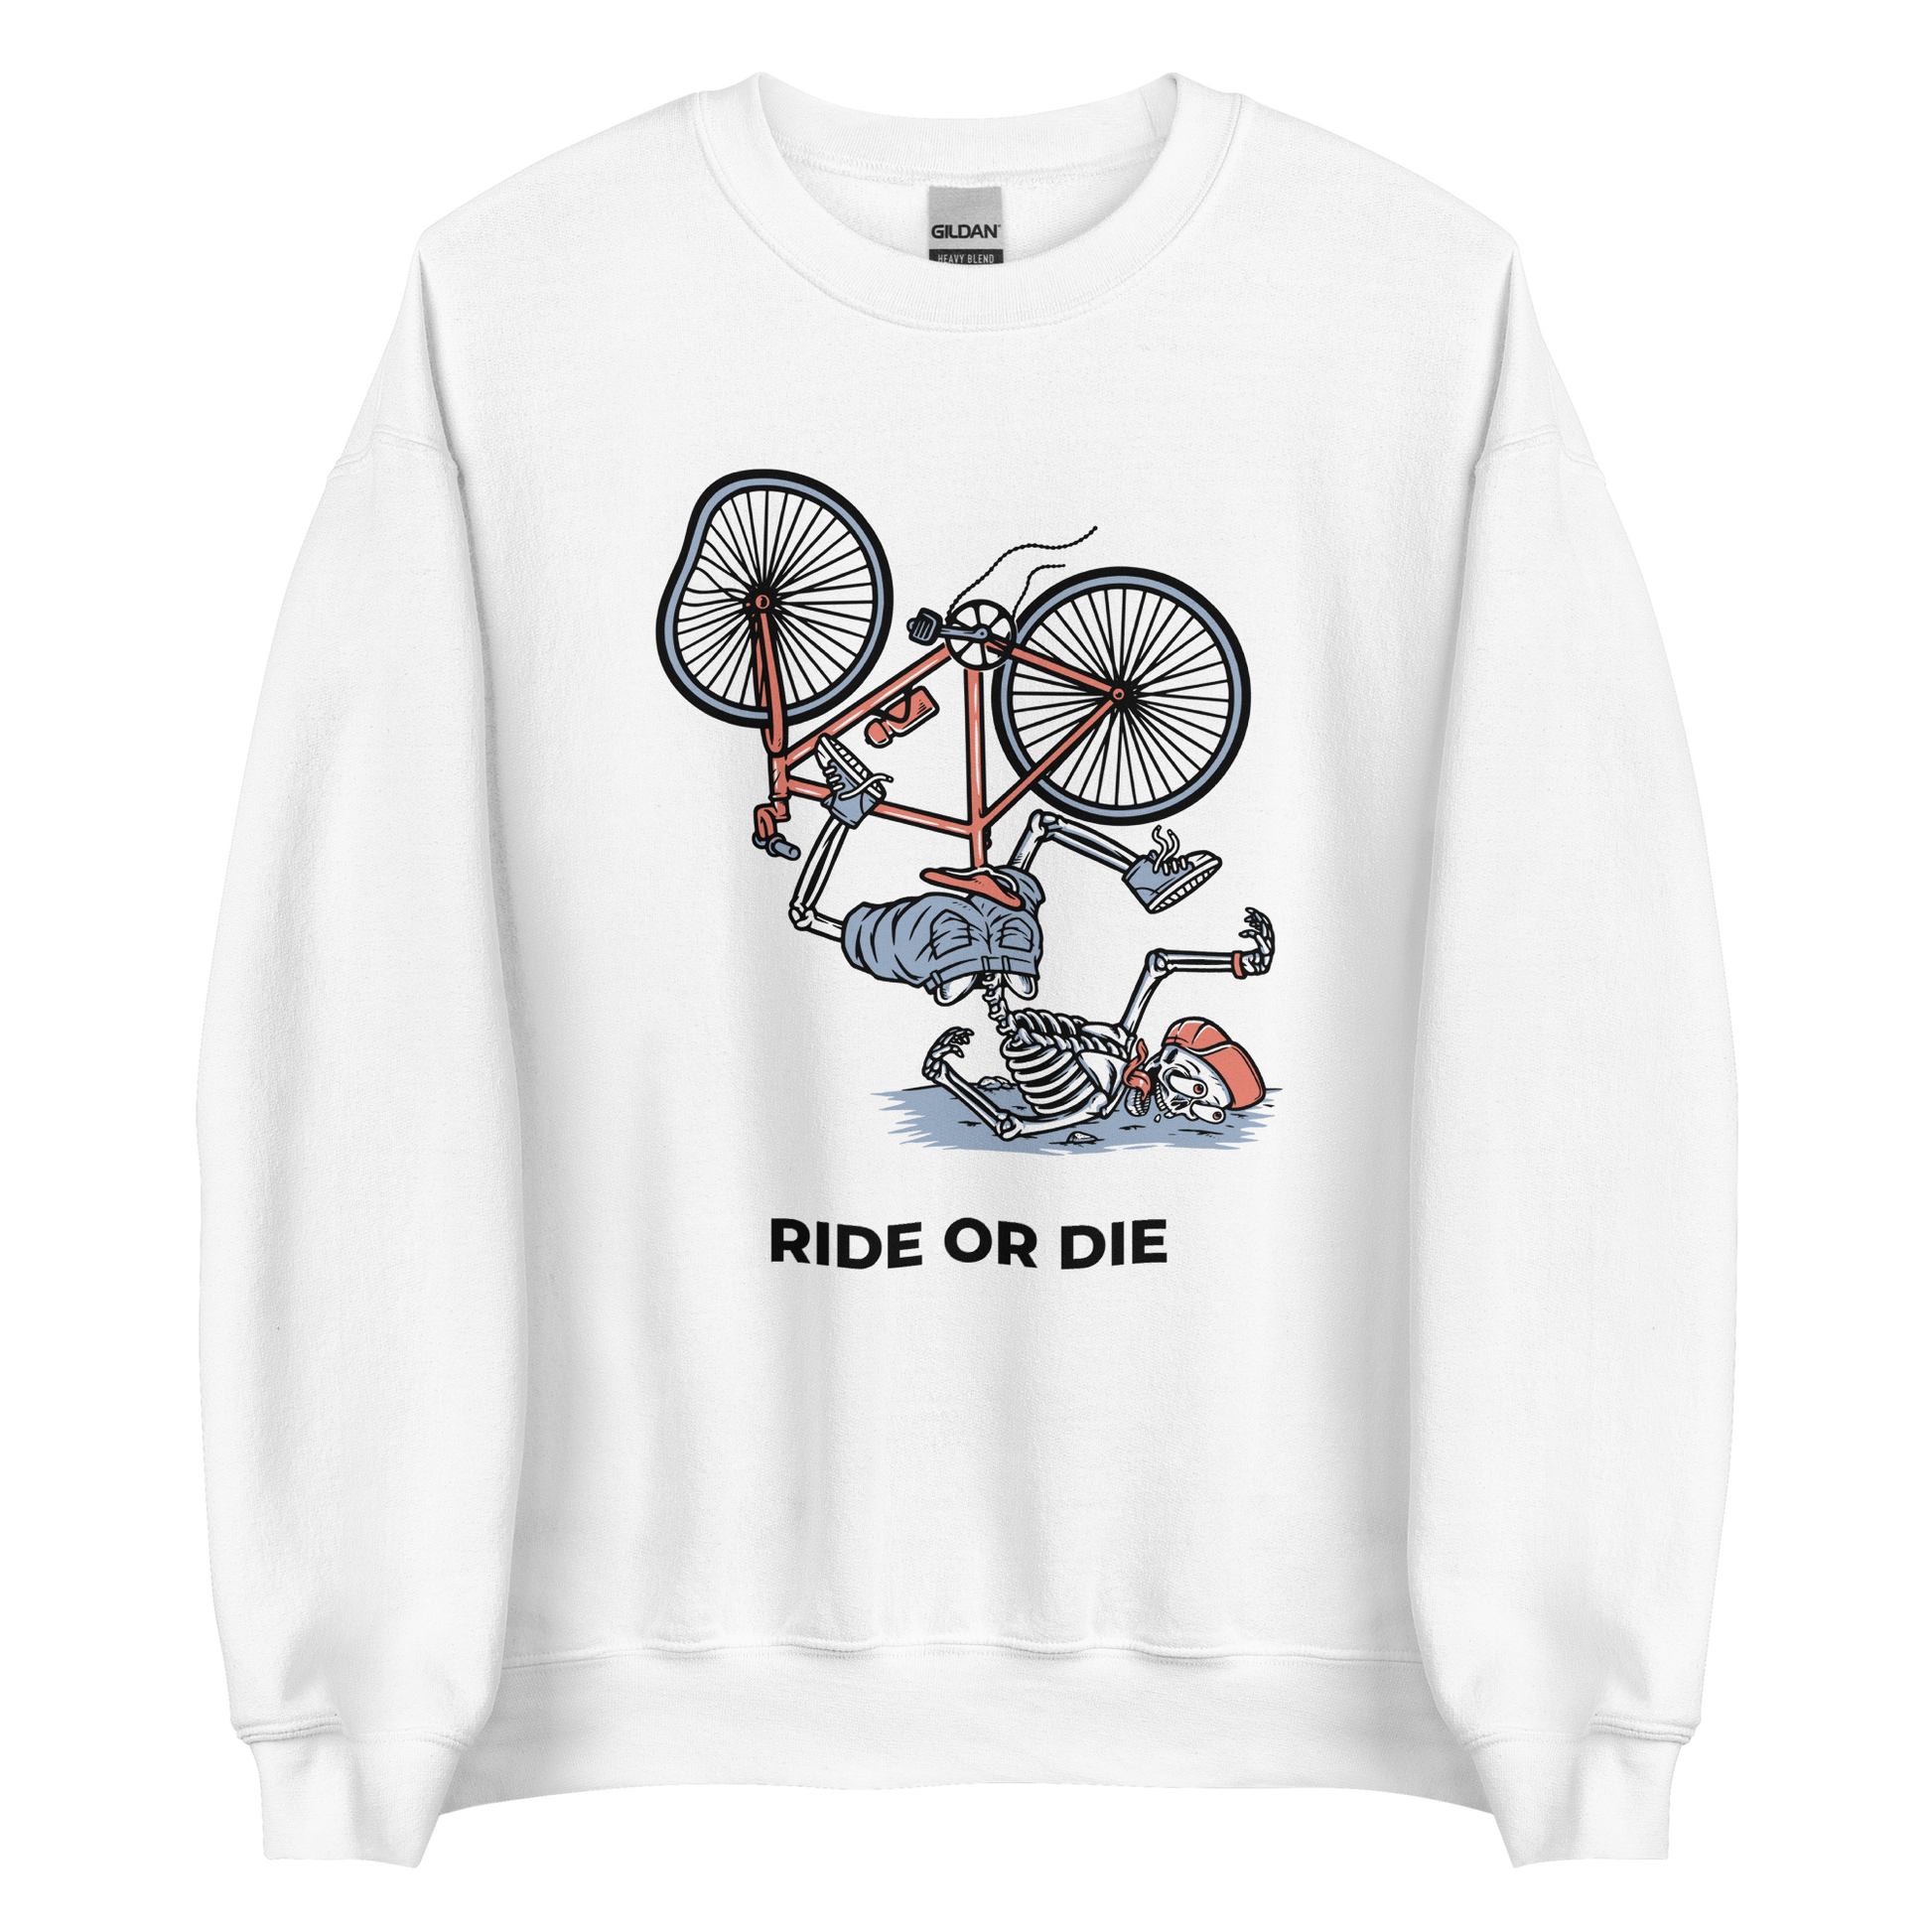 White Ride or Die Sweatshirt featuring a bold Skeleton Falling While Riding a Bicycle graphic on the chest - Funny Graphic Skeleton Sweatshirts - Boozy Fox